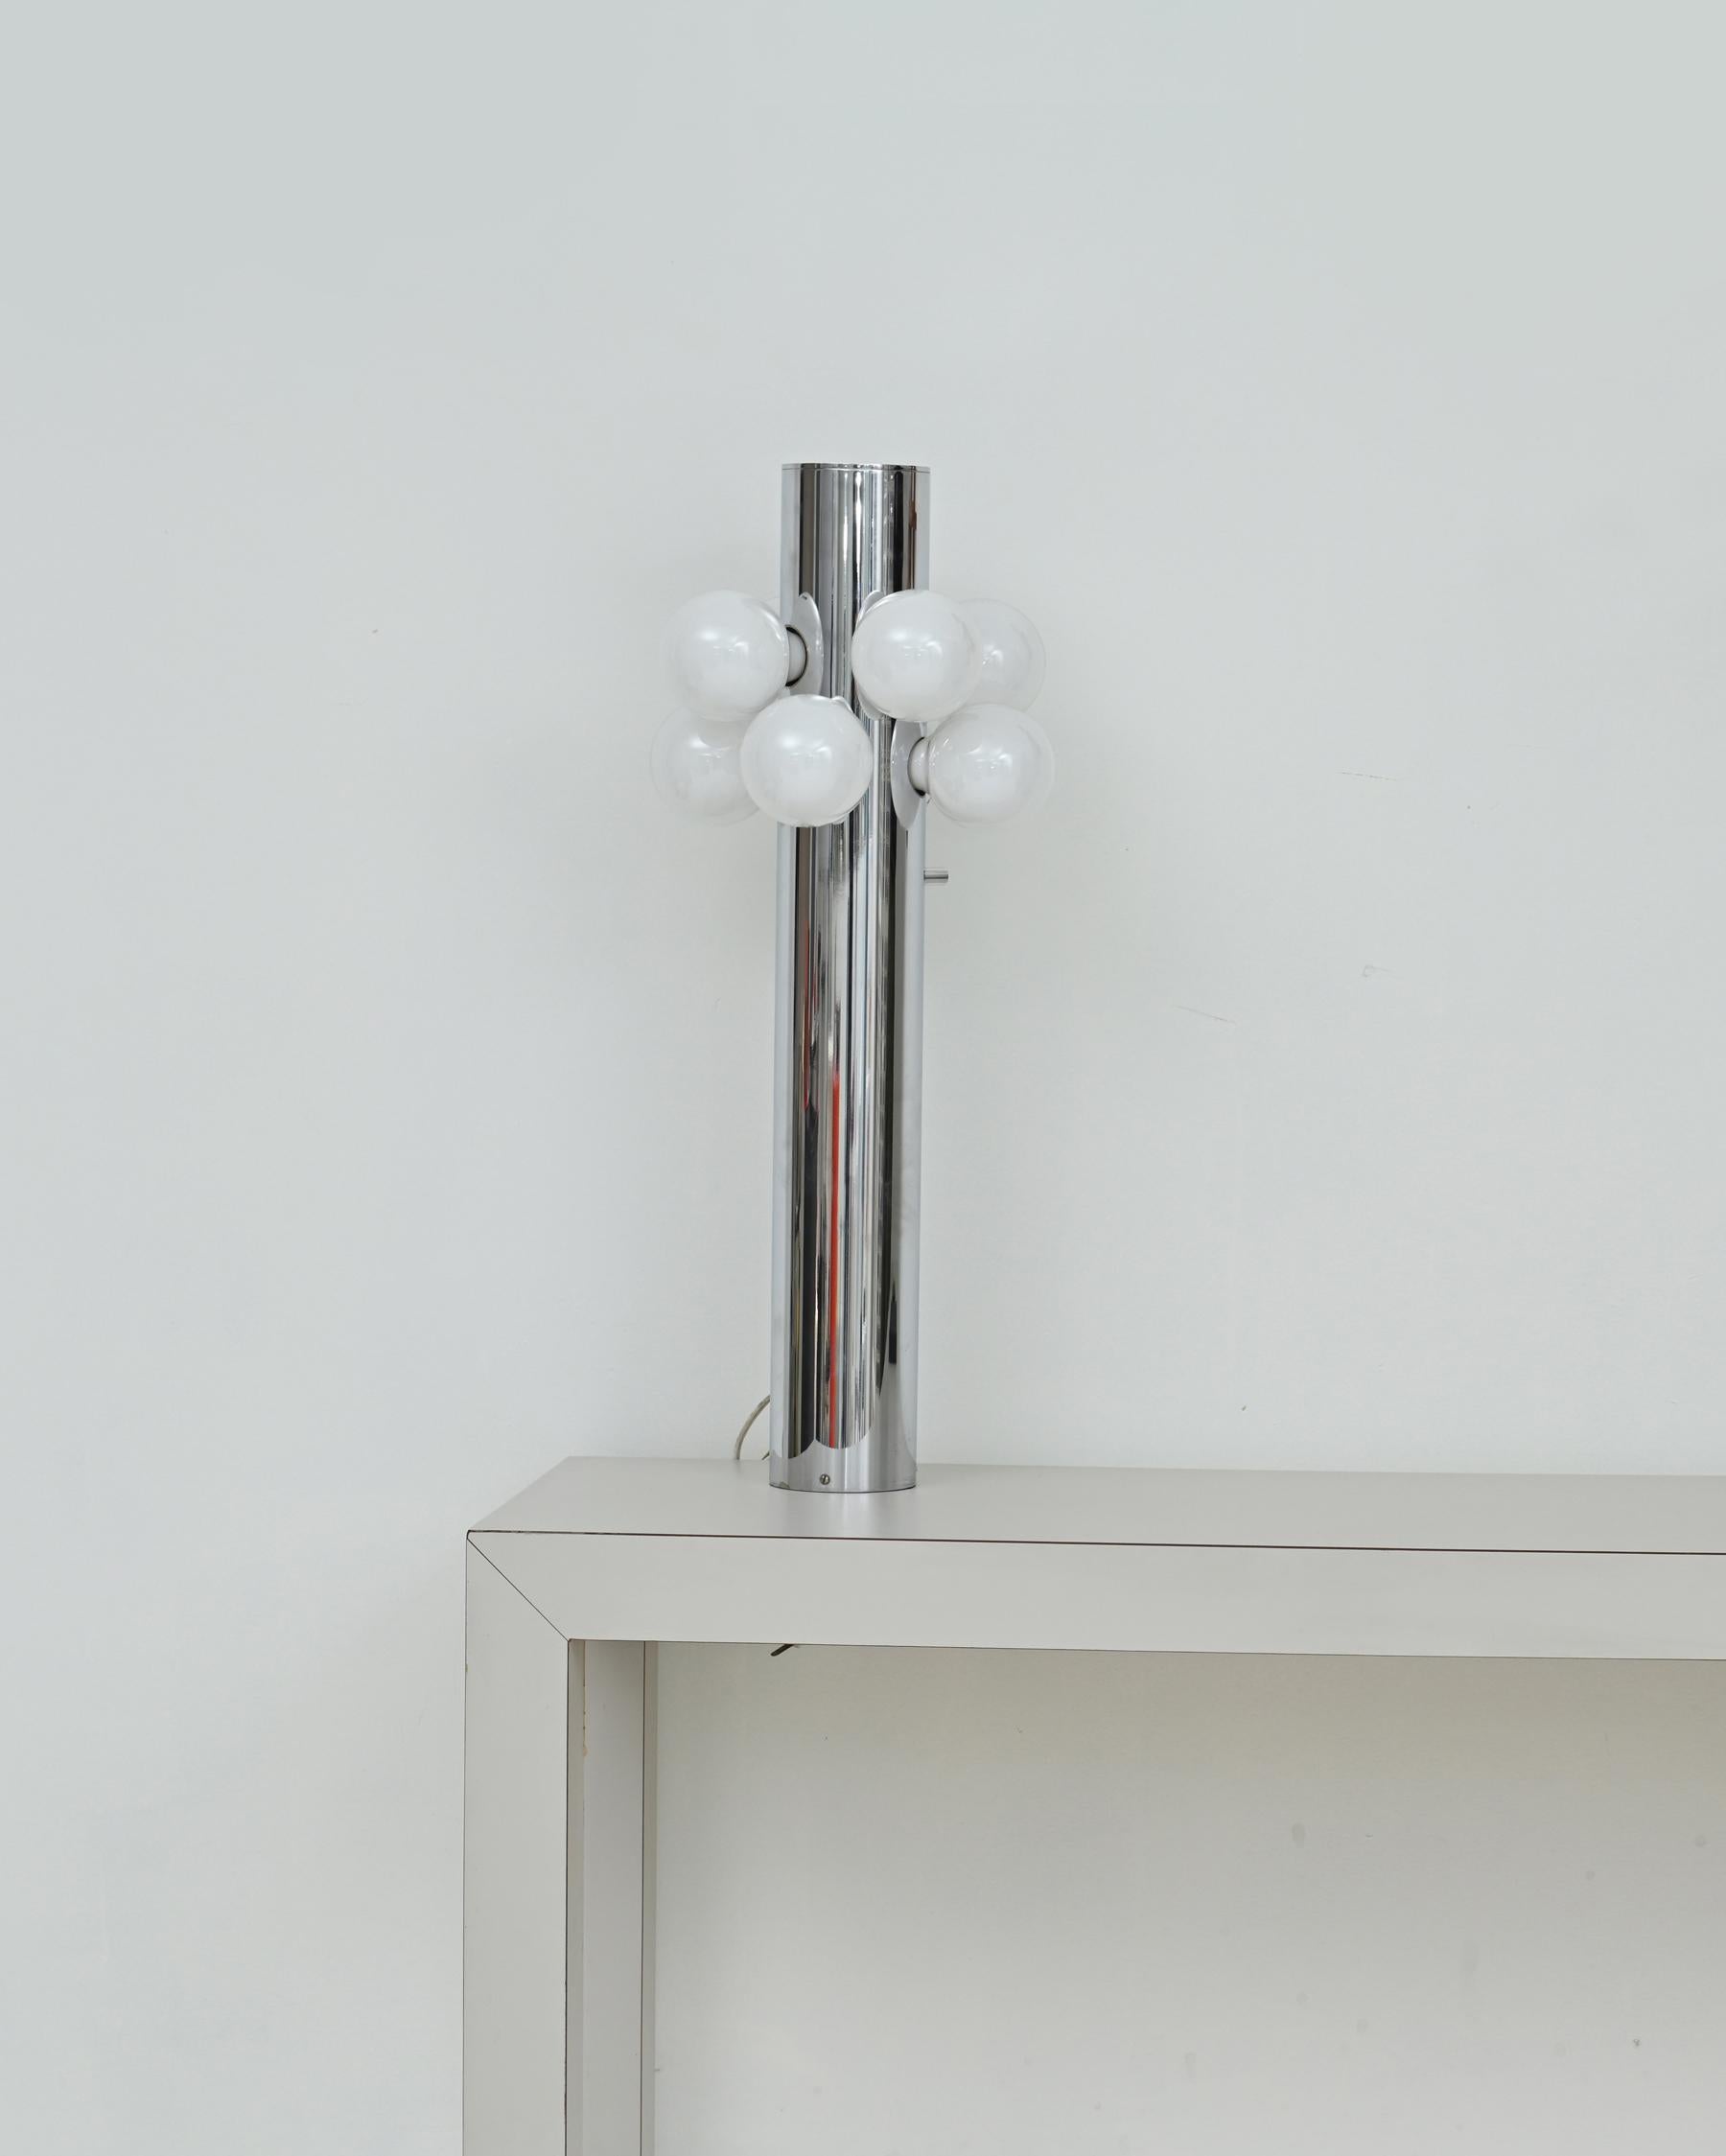 1970s Chrome Tubular Table or Floor Lamp by Robert Sonneman (attributed). Fully functioning dimmer switch. Low-wattage bulbs shown included. Very heavy construction. Light surface wear.